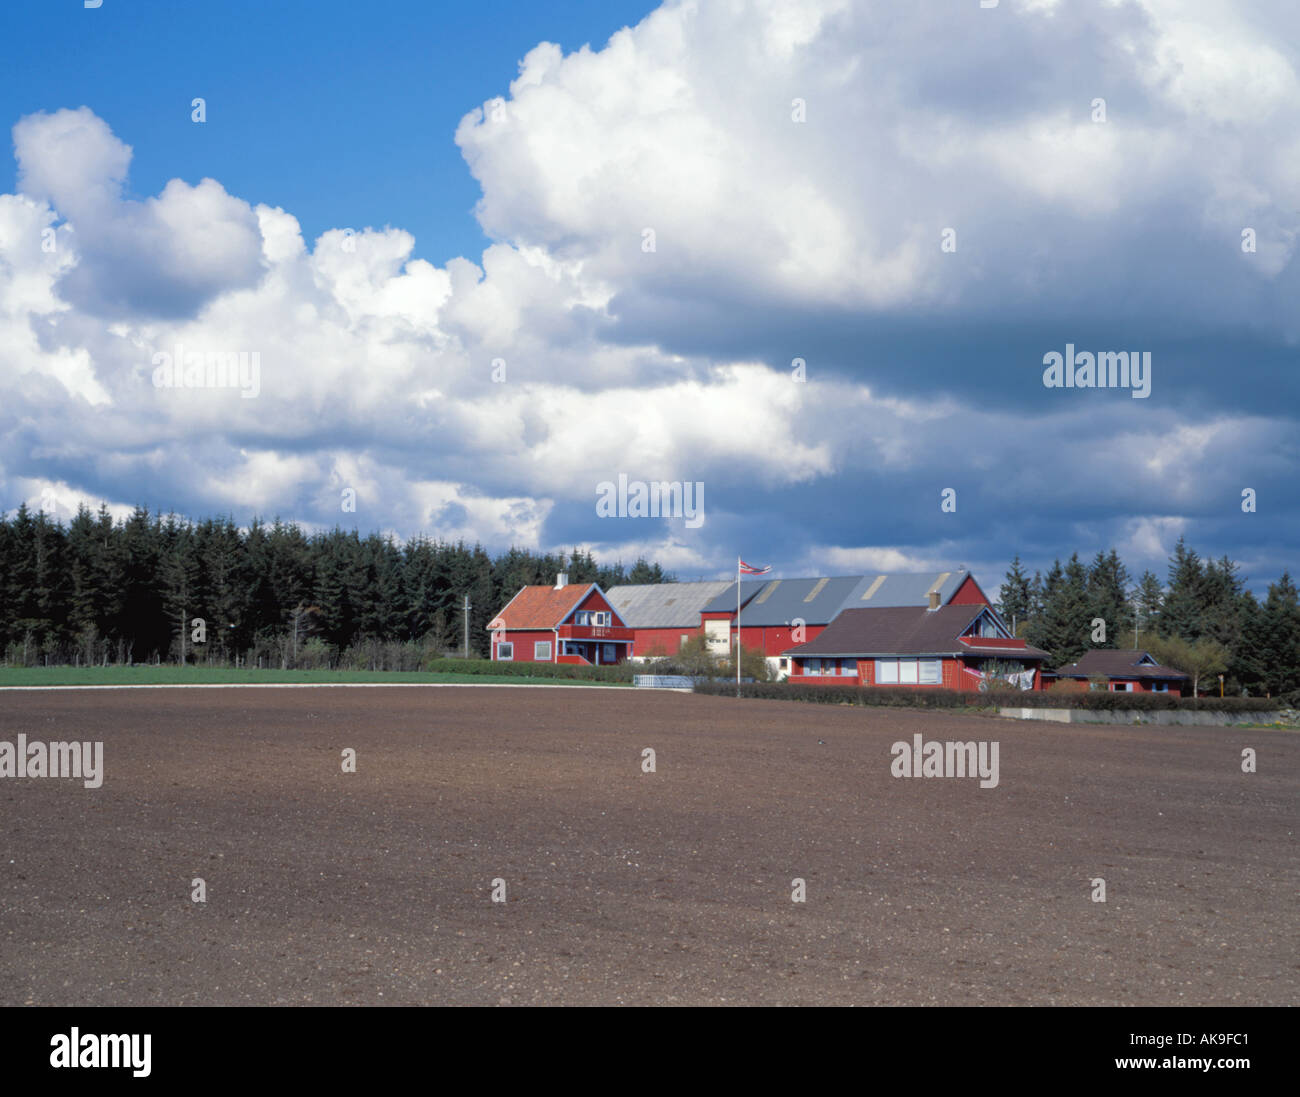 Agricultural scene; Jæren area, Rogaland, Norway. Stock Photo